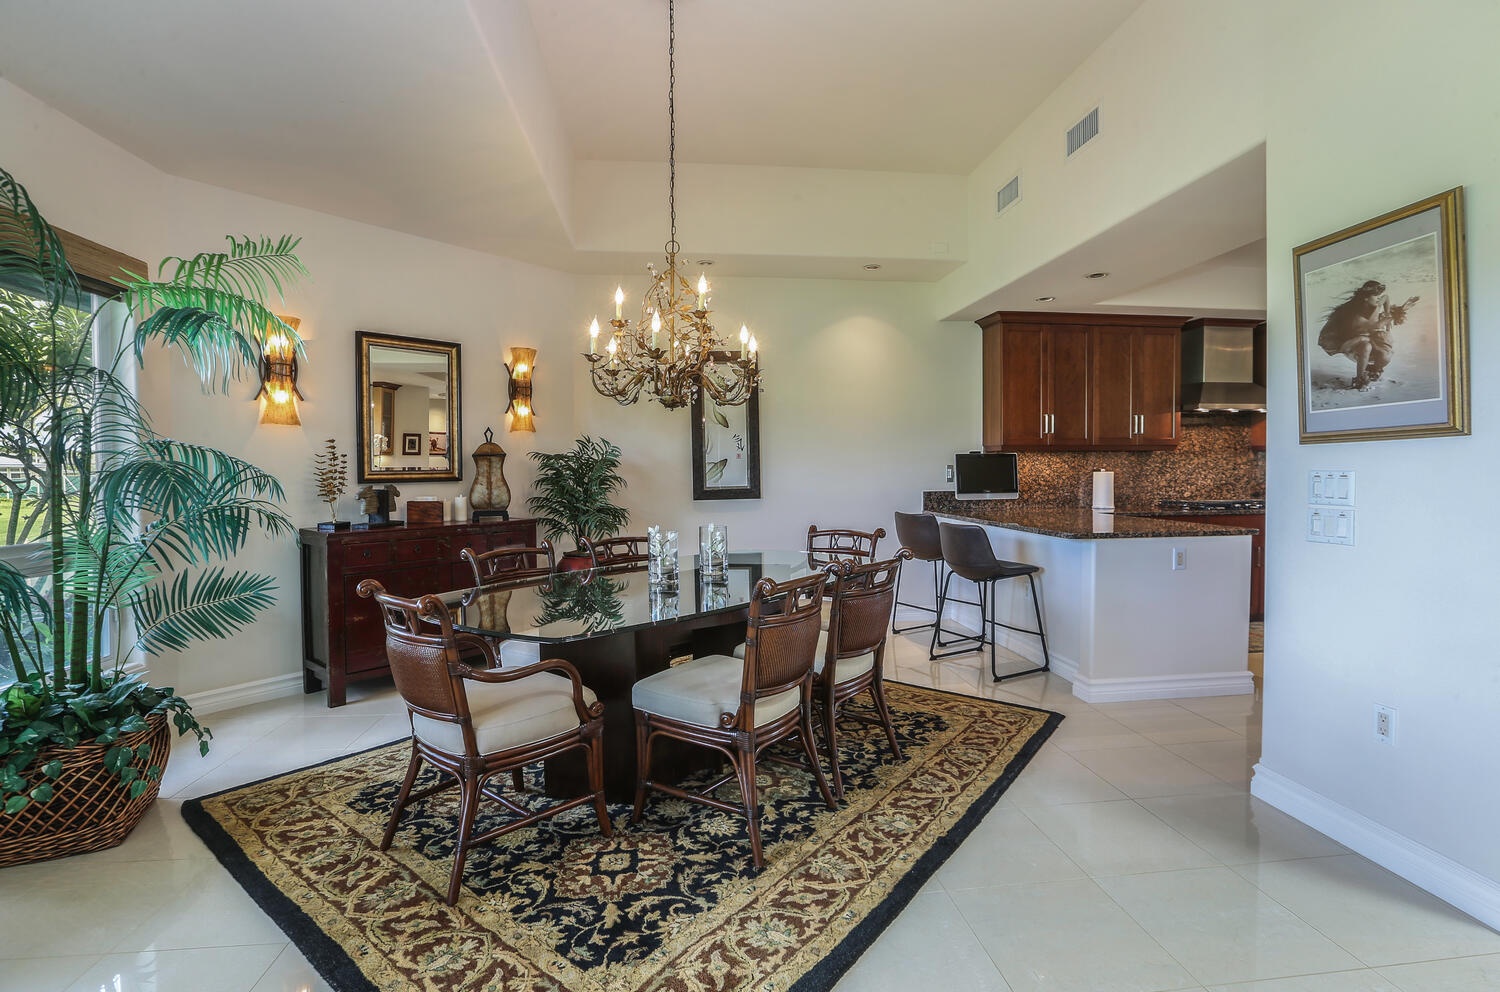 Princeville Vacation Rentals, Hale Moana - The formal dining area comfortably seats 6 and flows seamlessly into the kitchen